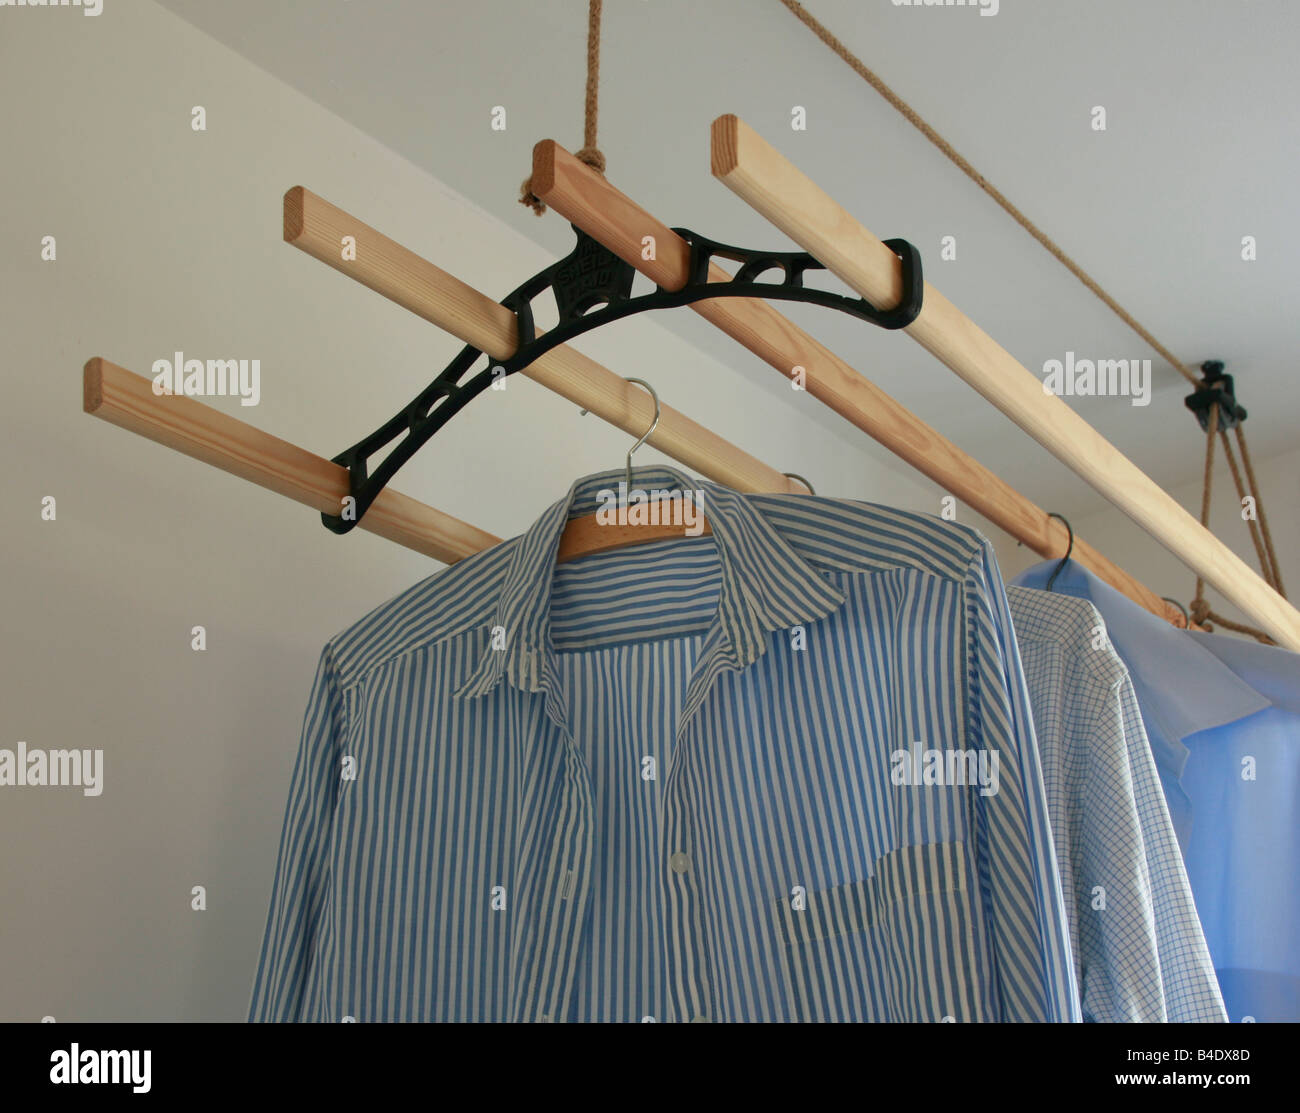 Shirts hung up to dry indoors on a ceiling rack - energy saving ! Stock Photo